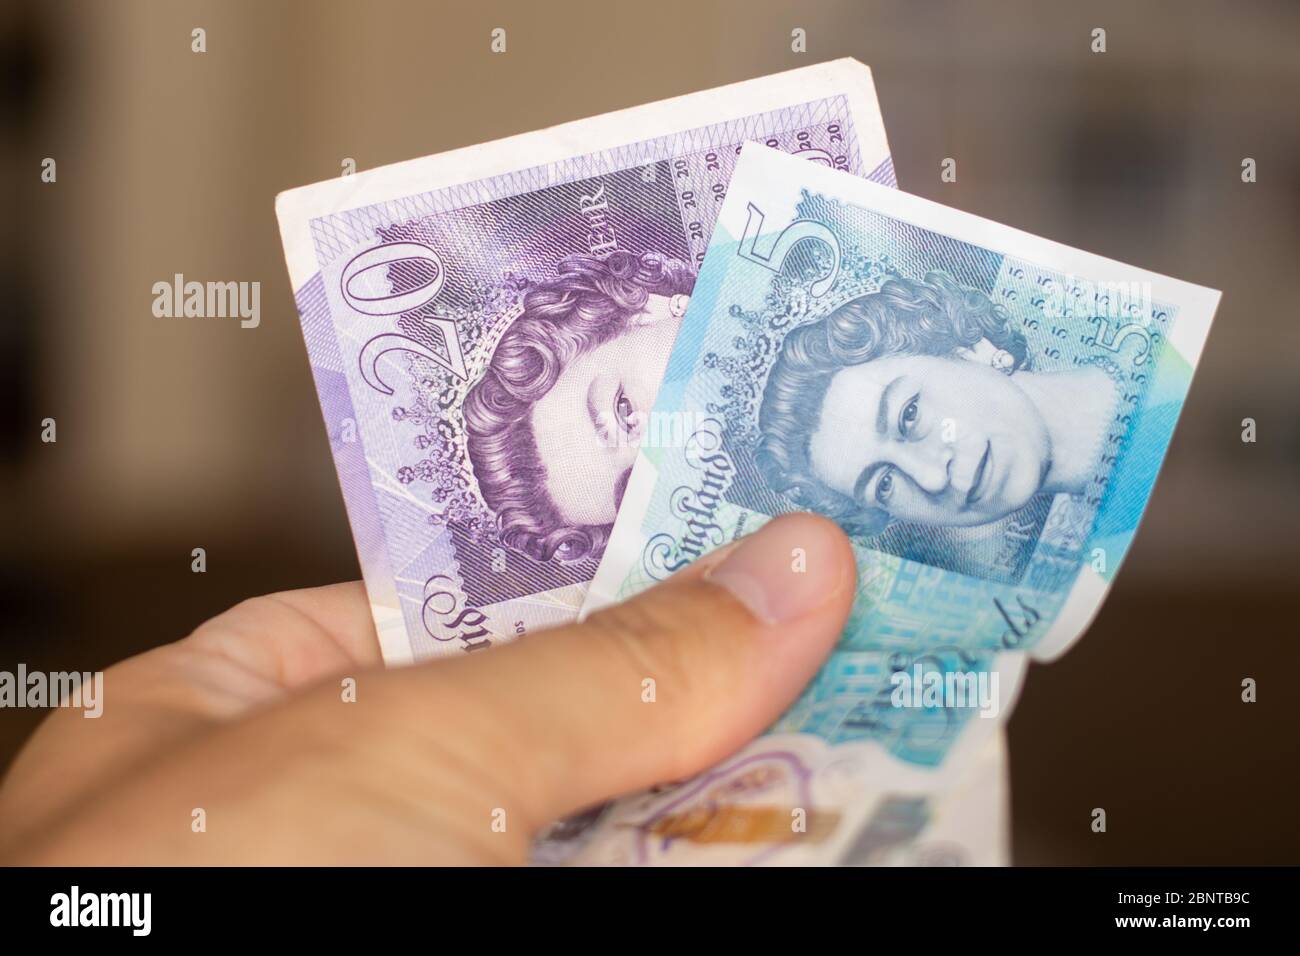 Persons hand giving the Currency of the England in the United Kingdom - One purple twenty pound and blue five pound note spread out on a brown backgro Stock Photo